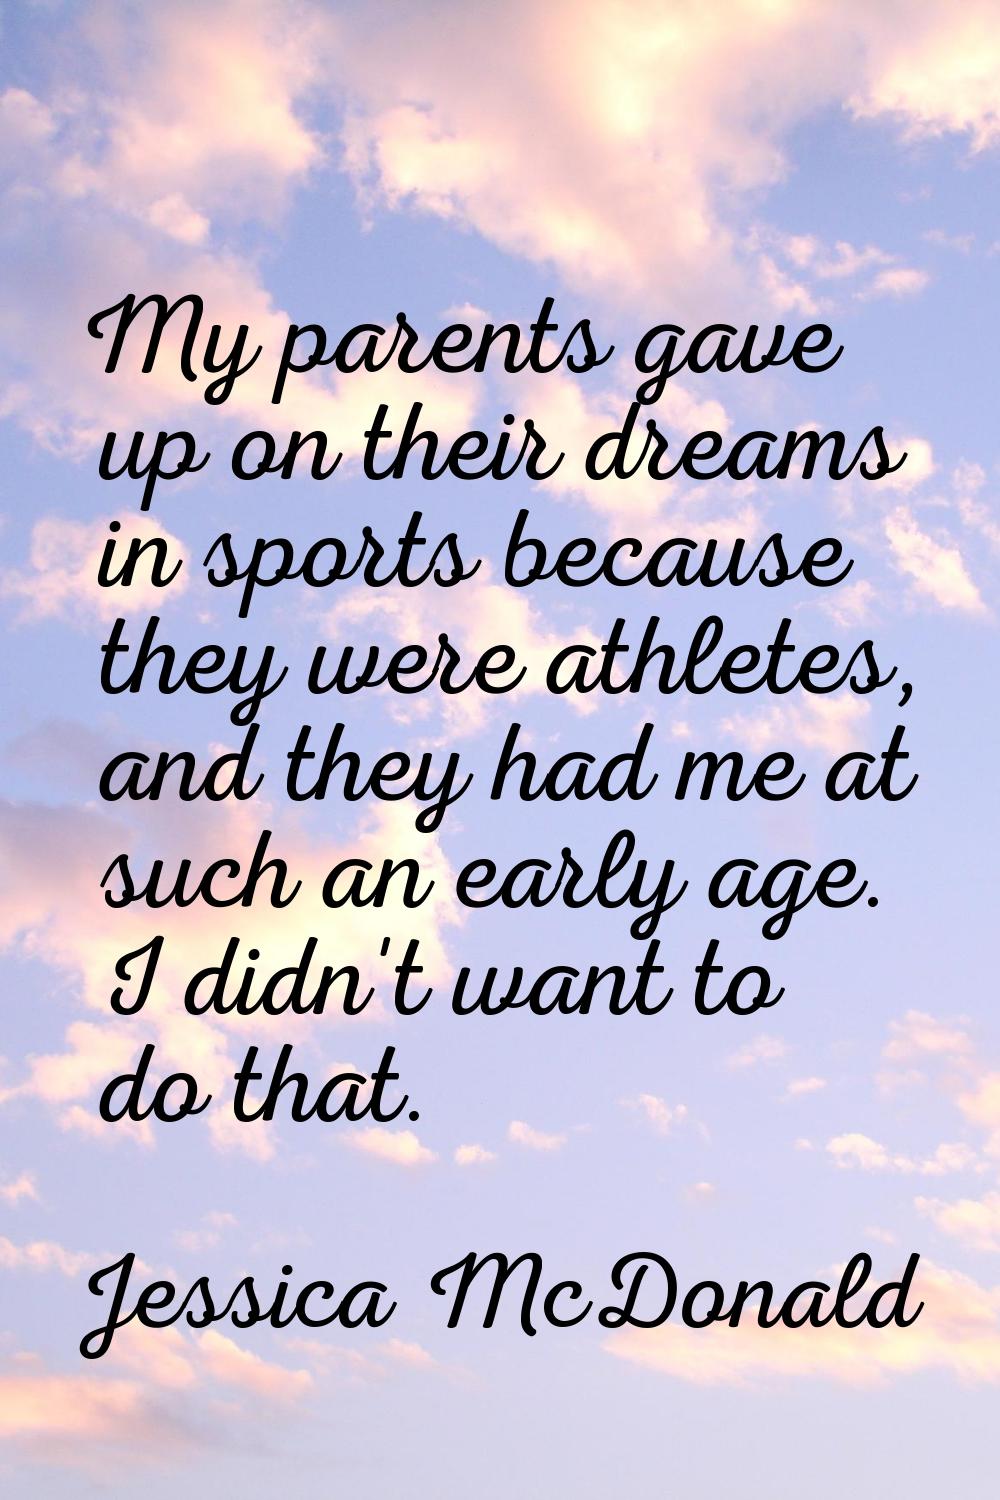 My parents gave up on their dreams in sports because they were athletes, and they had me at such an